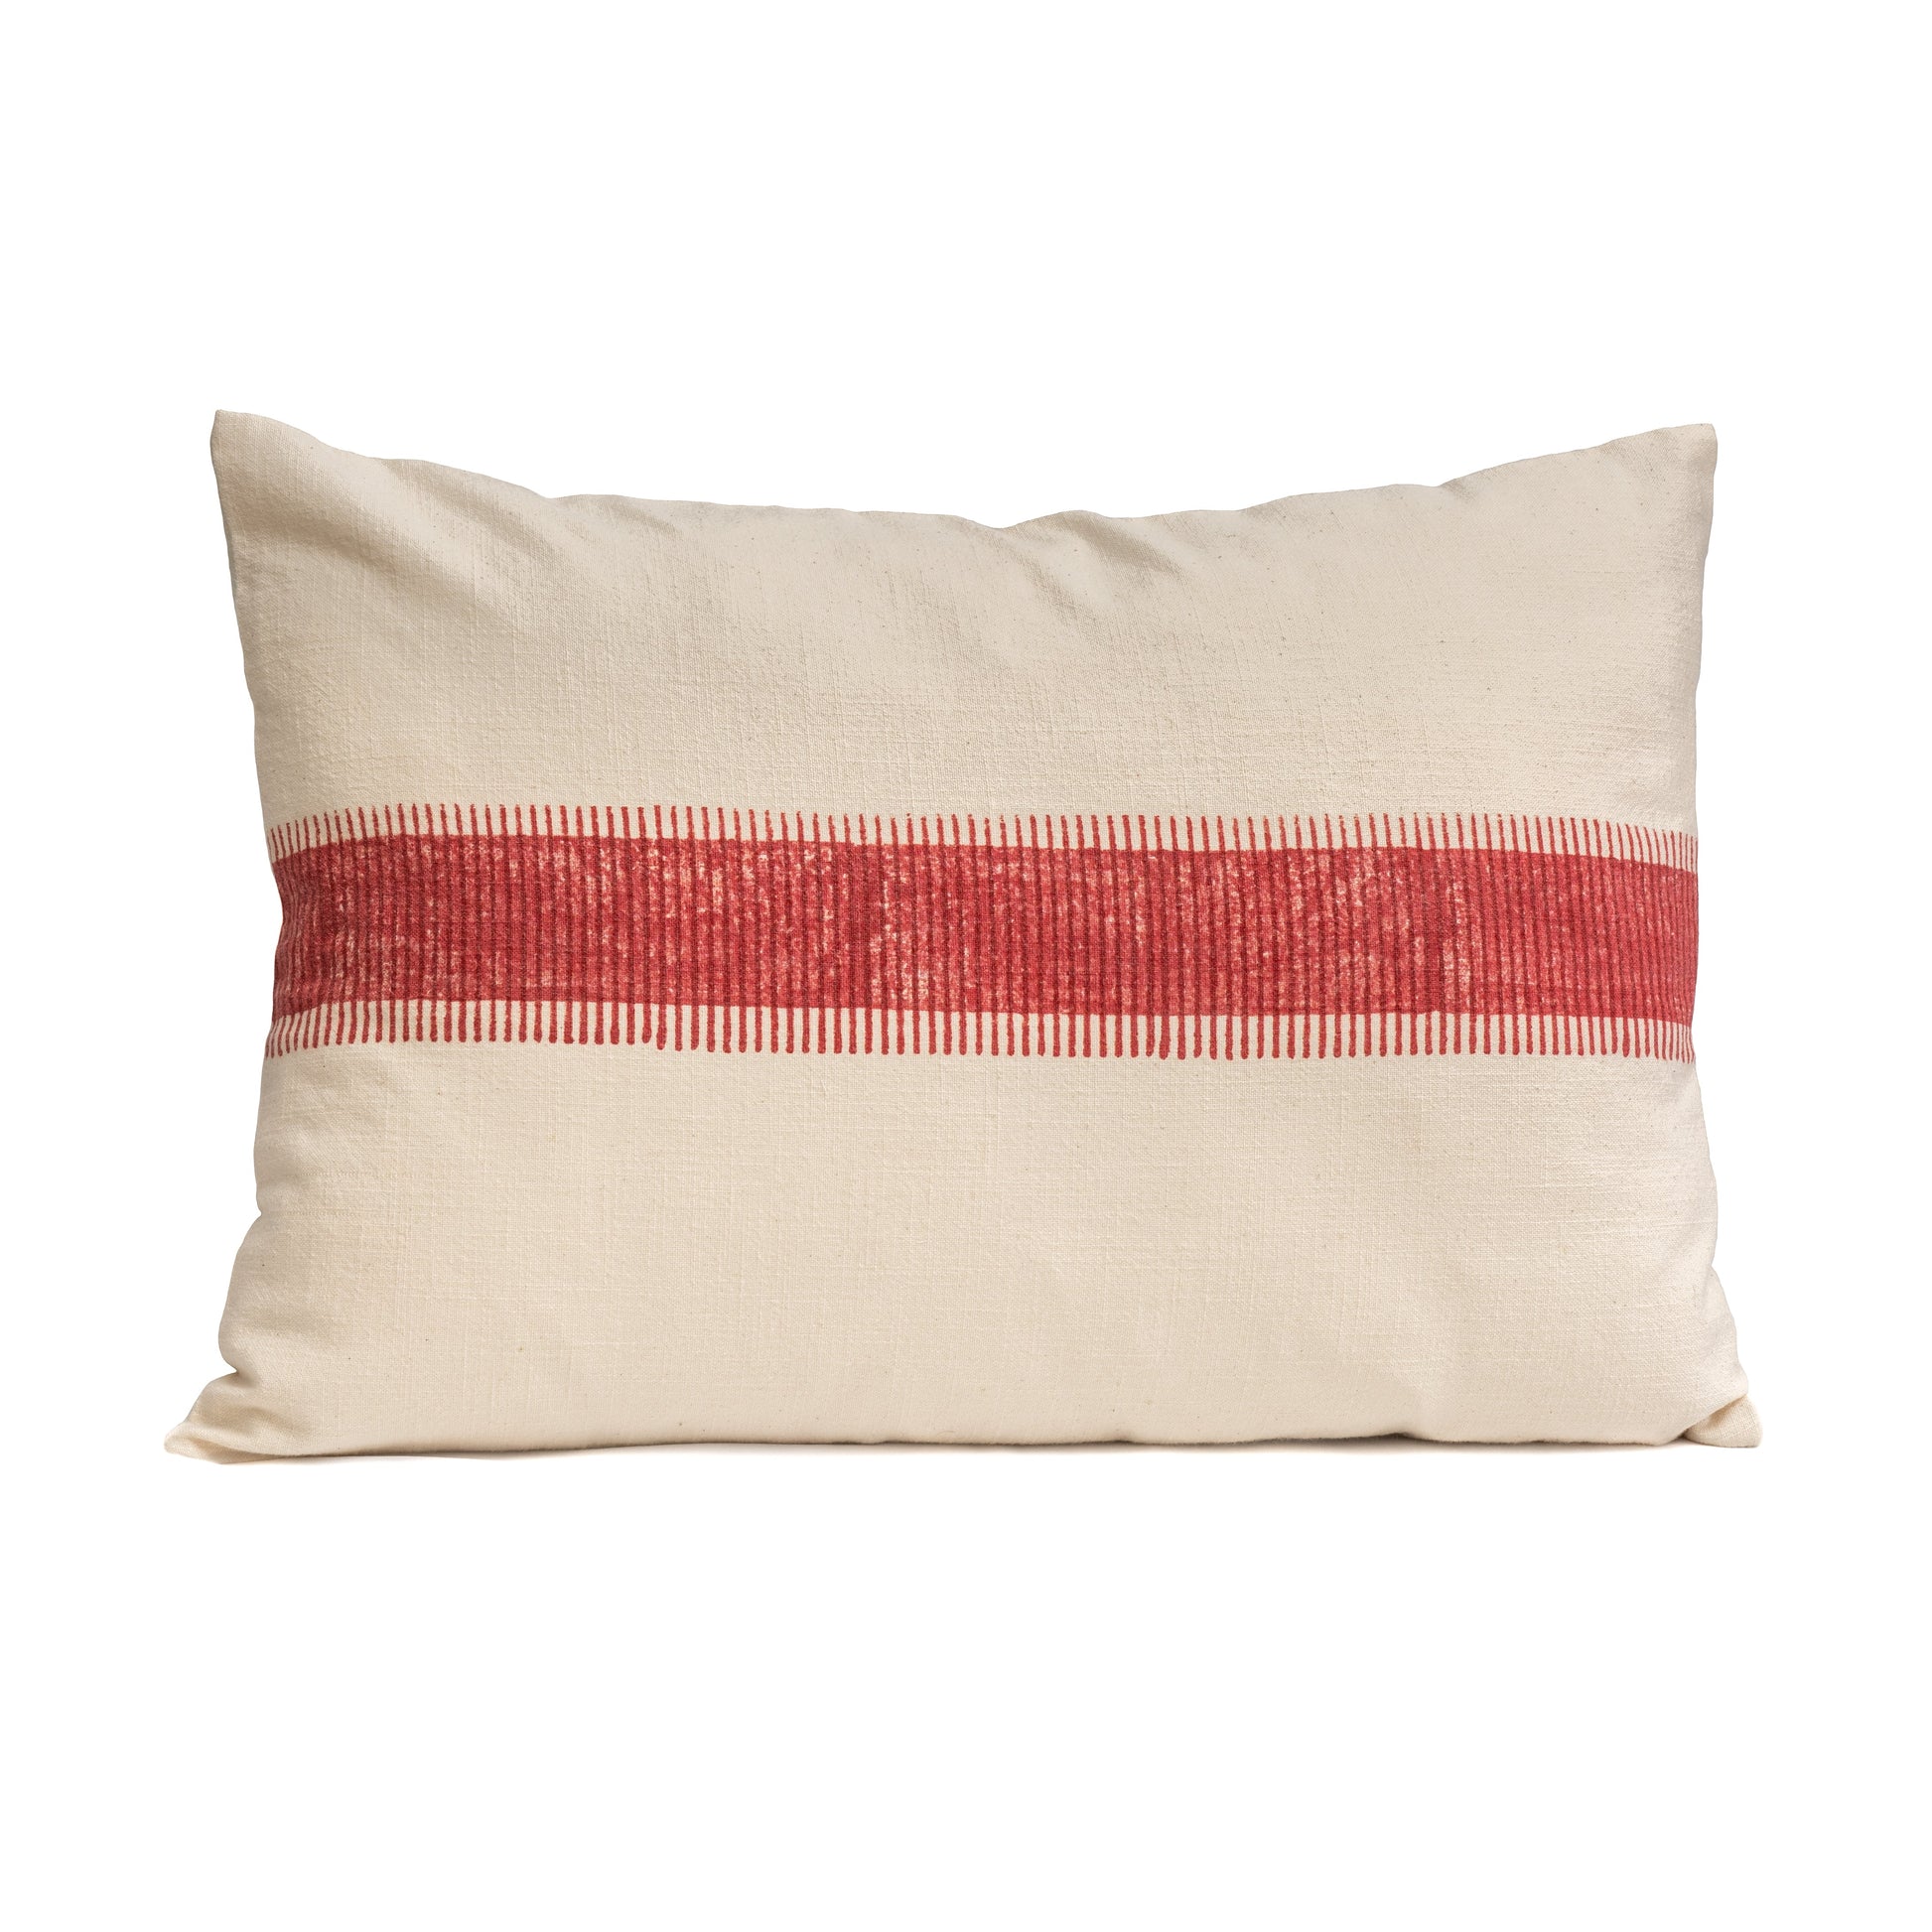 Hand block printed red striped cotton lumbar cushion cover